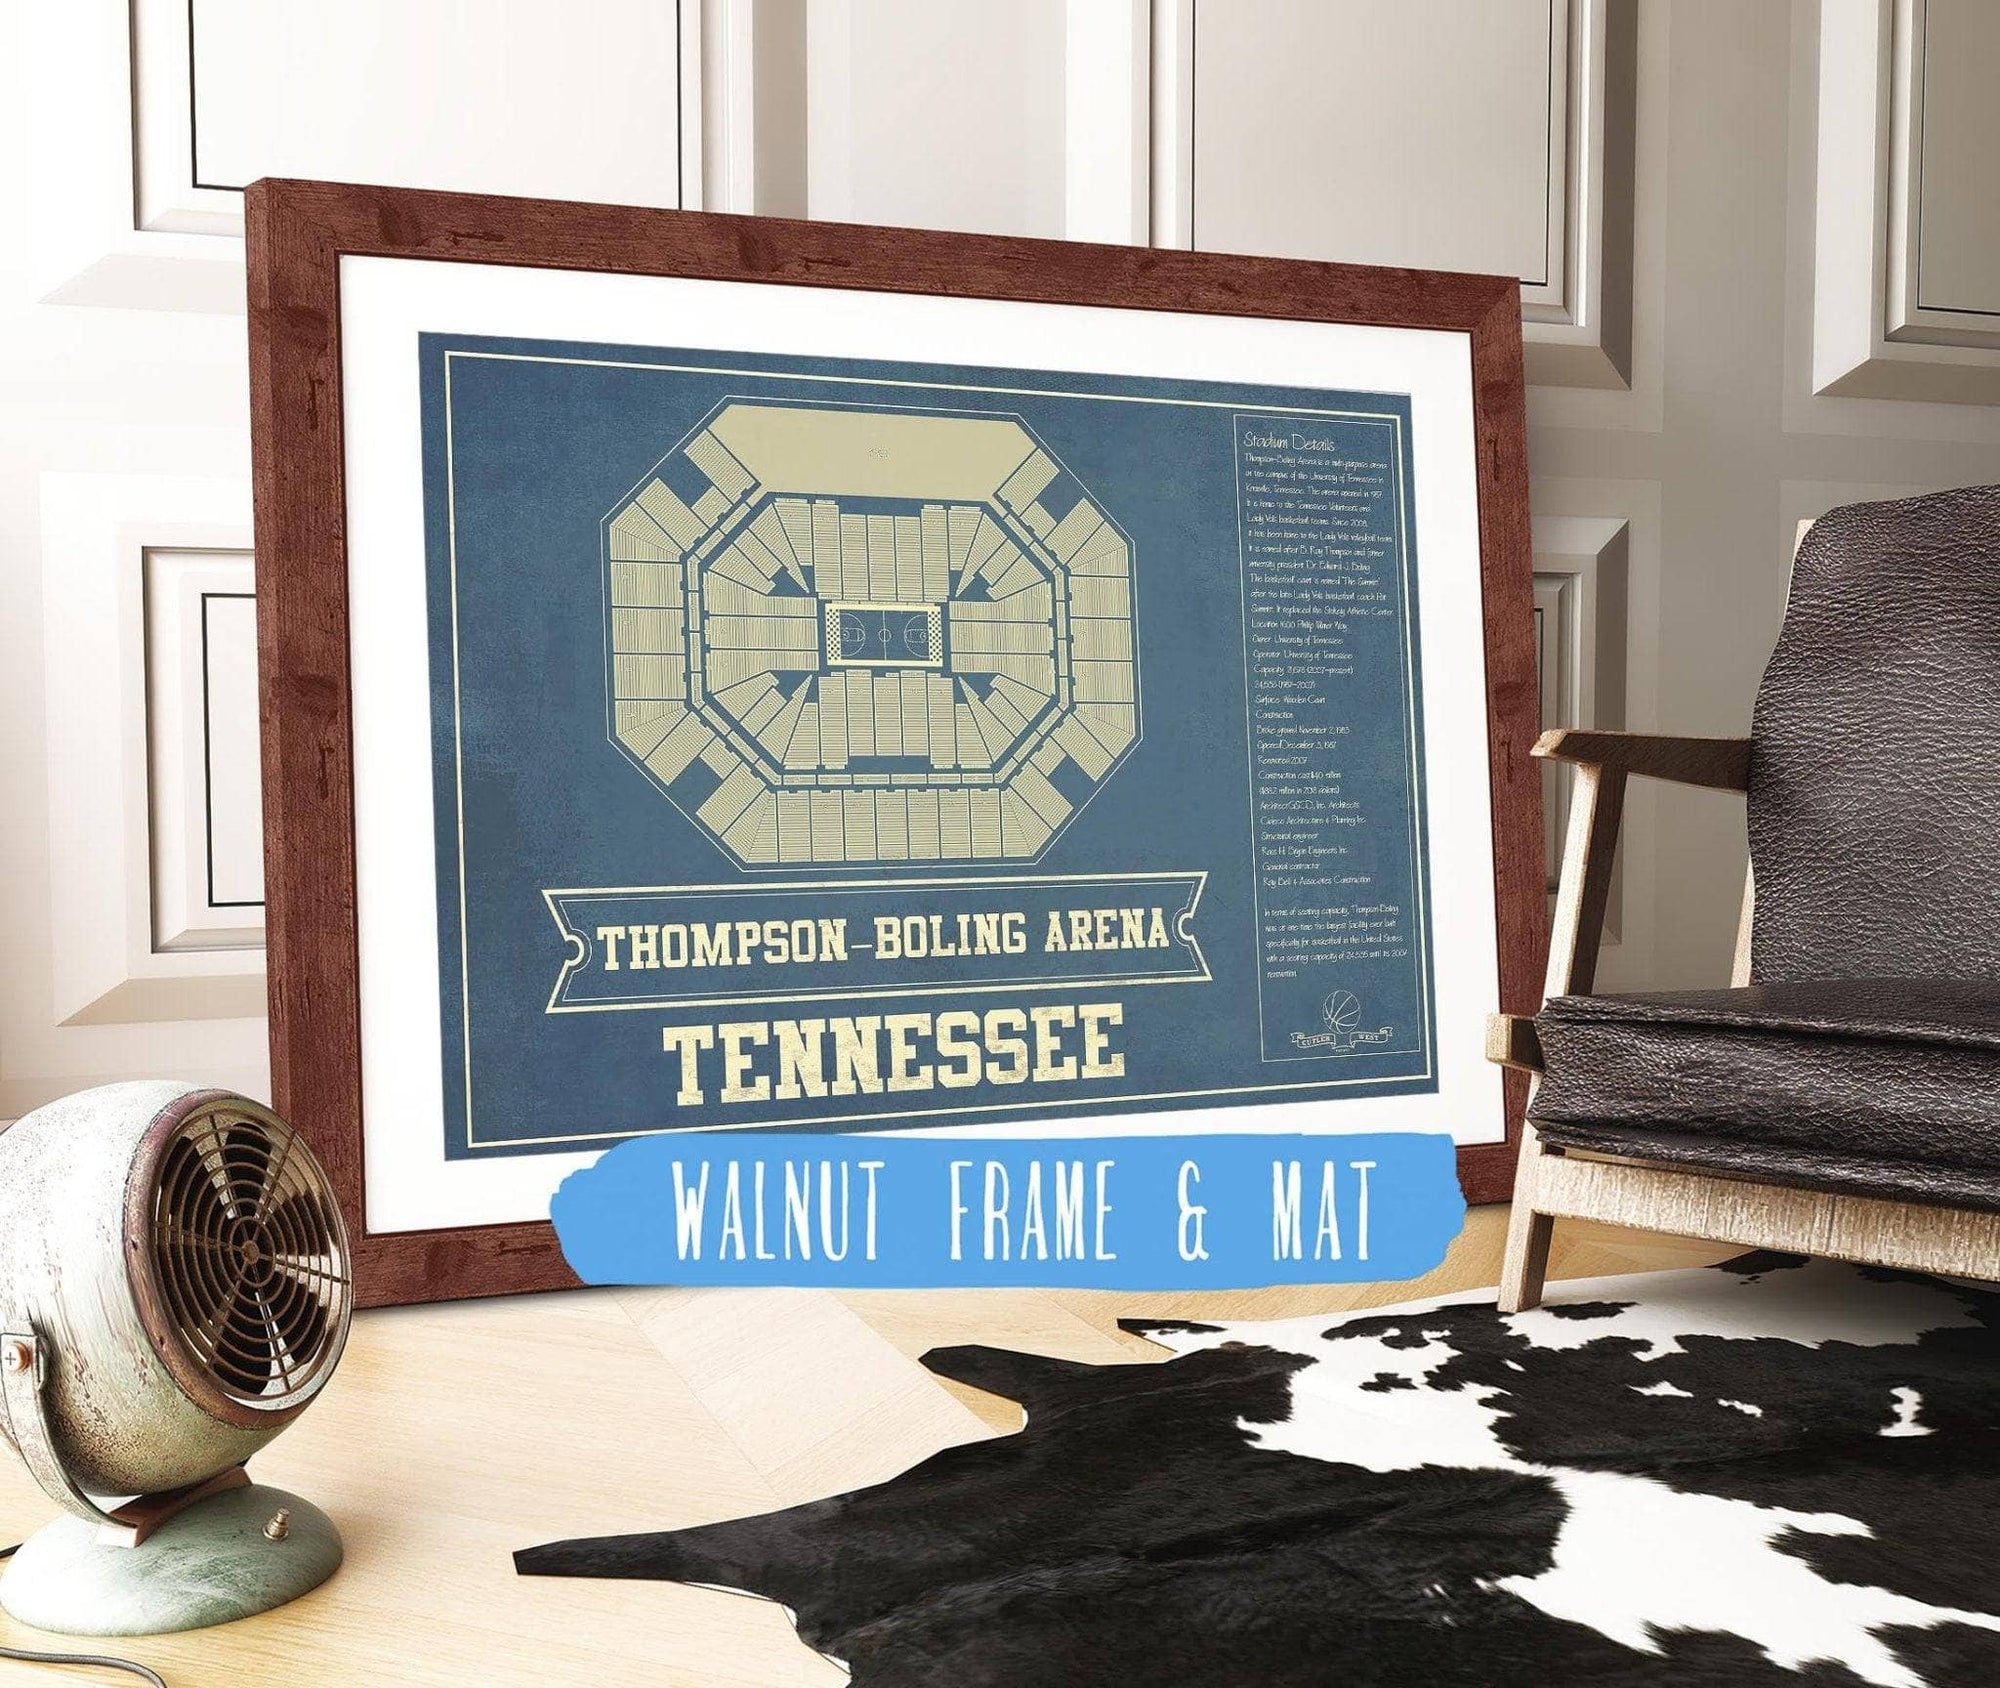 Cutler West Basketball Collection 14" x 11" / Walnut Frame & Mat Thompson–Boling Arena - Tennessee Volunteers, Lady Vols NCAA College Basketball Blueprint Art 93335021384684